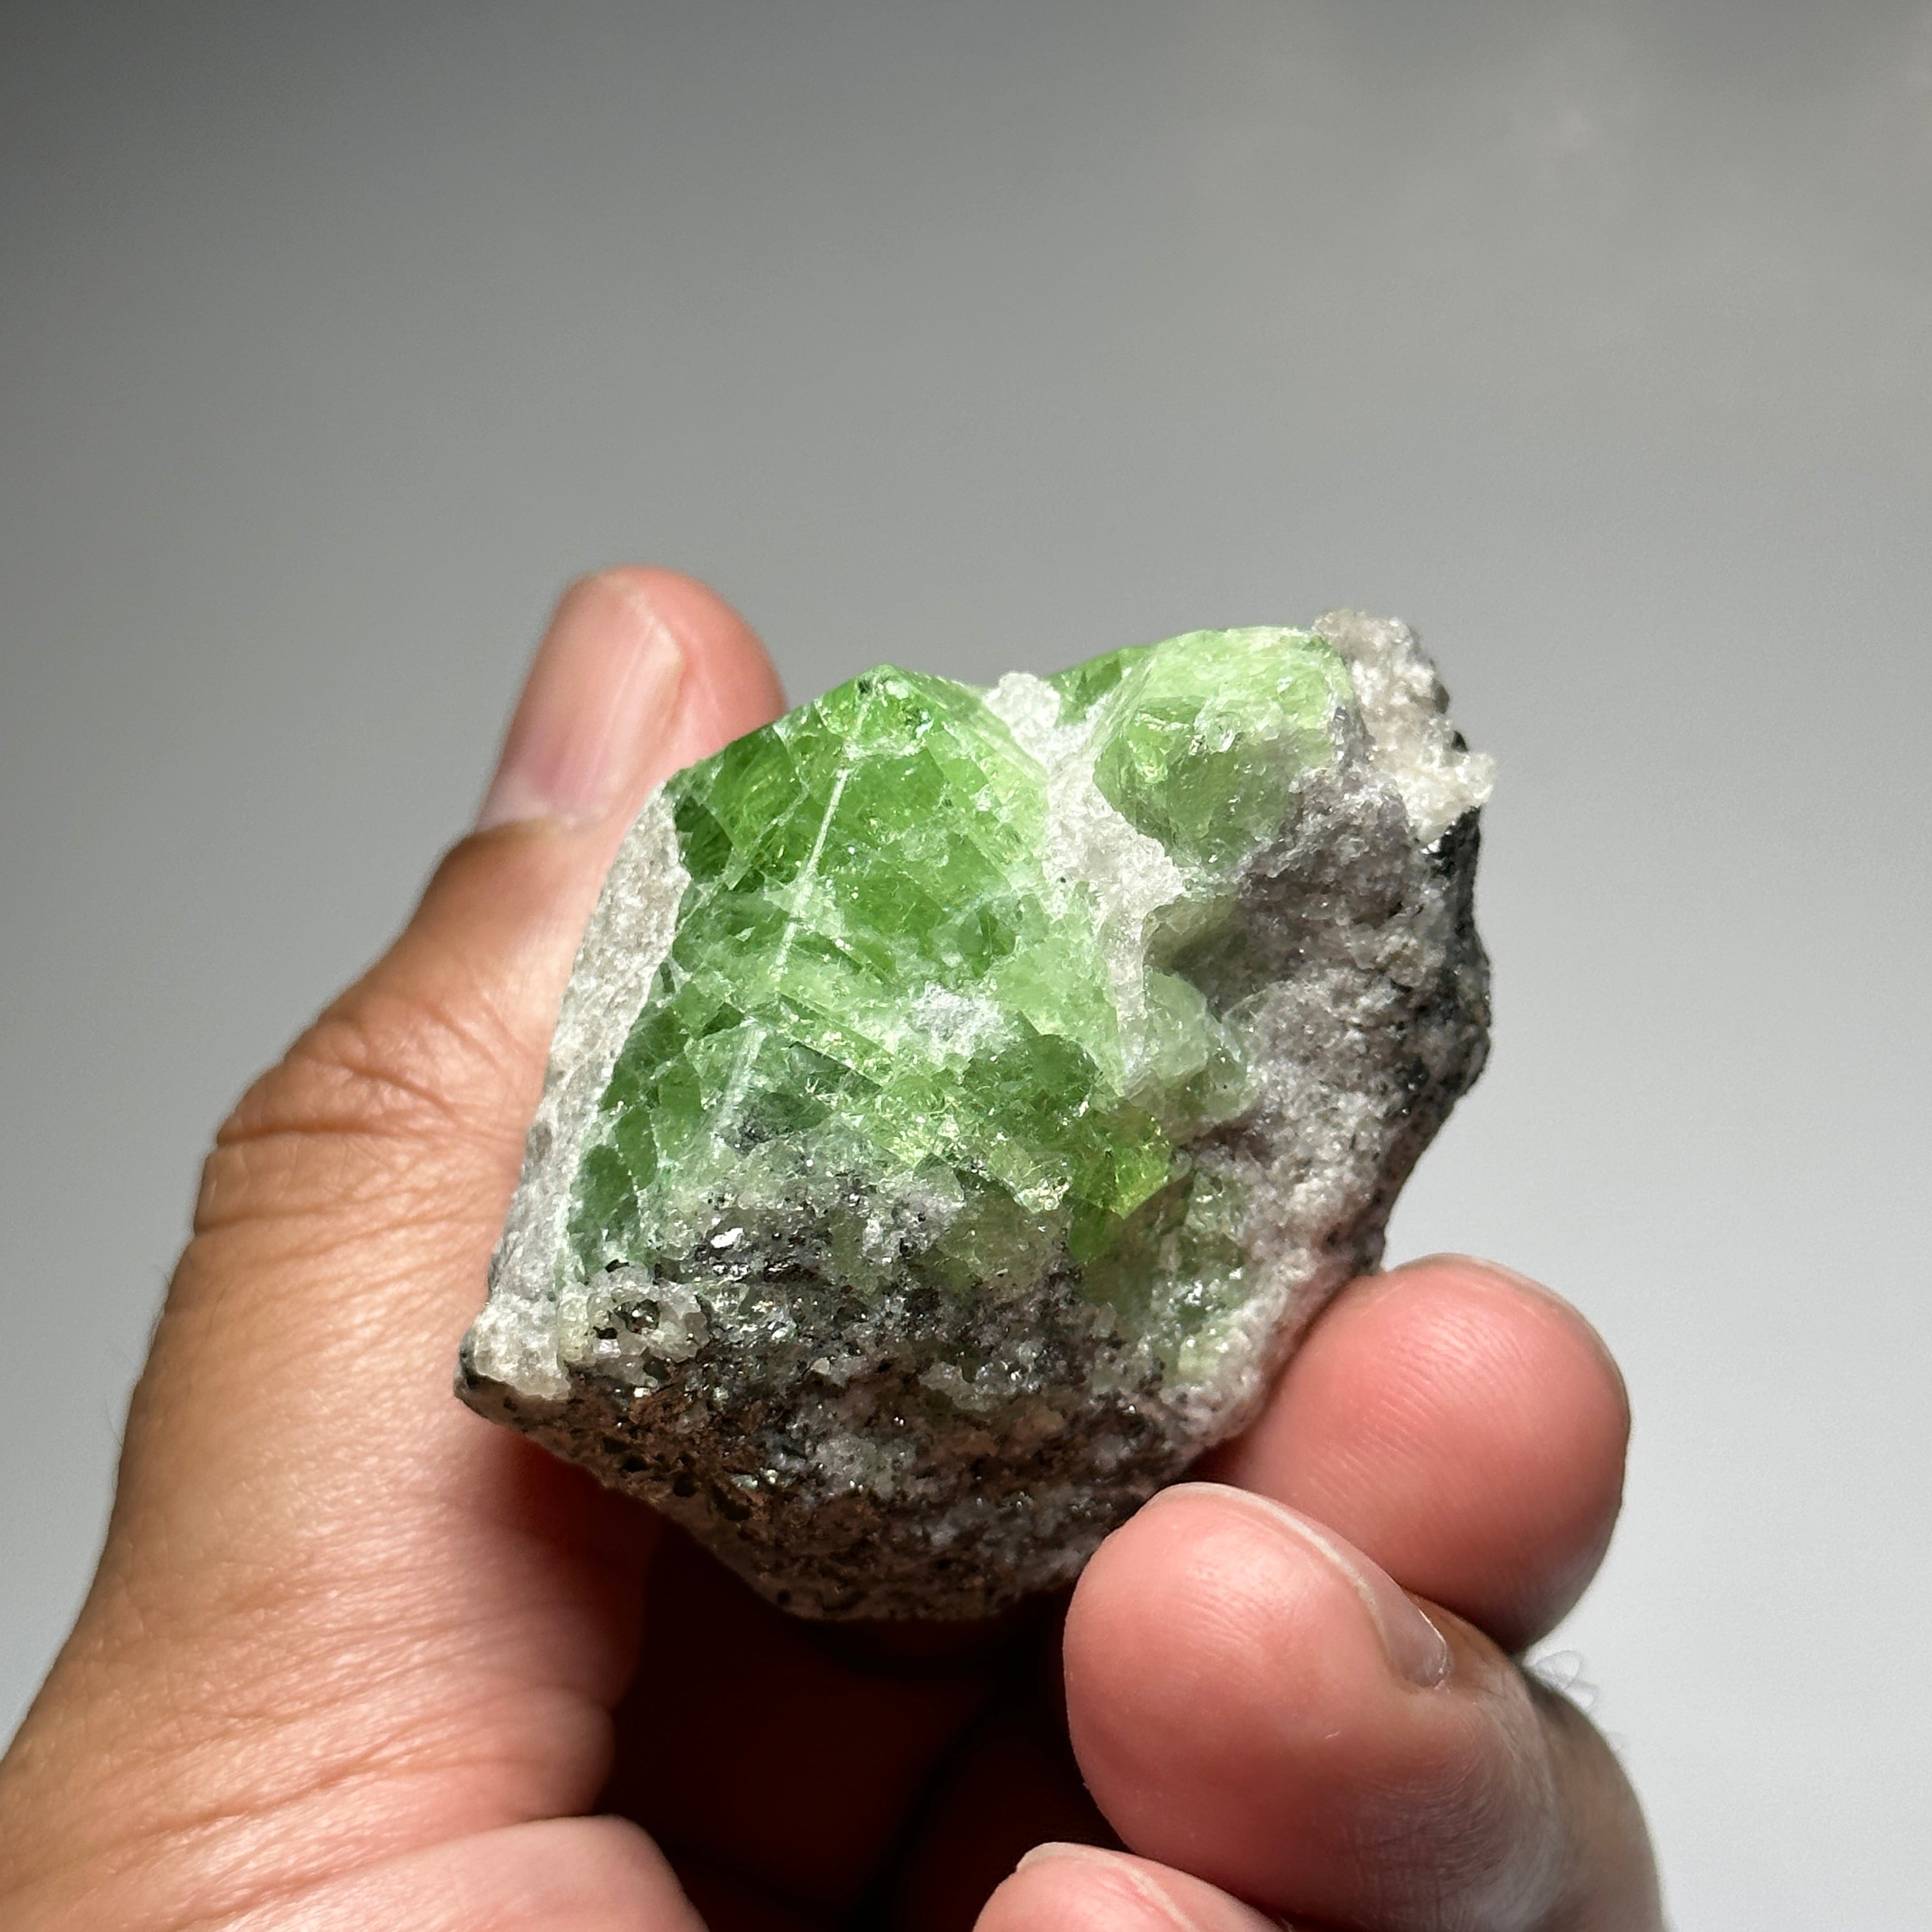 84.30gm / 421.50ct Tsavorite Crystal With Tanzanite And Pyrite on Matrix, Merelani, Tanzania. 47 x 36 x 39mm Gem portions and sharp point on crystals